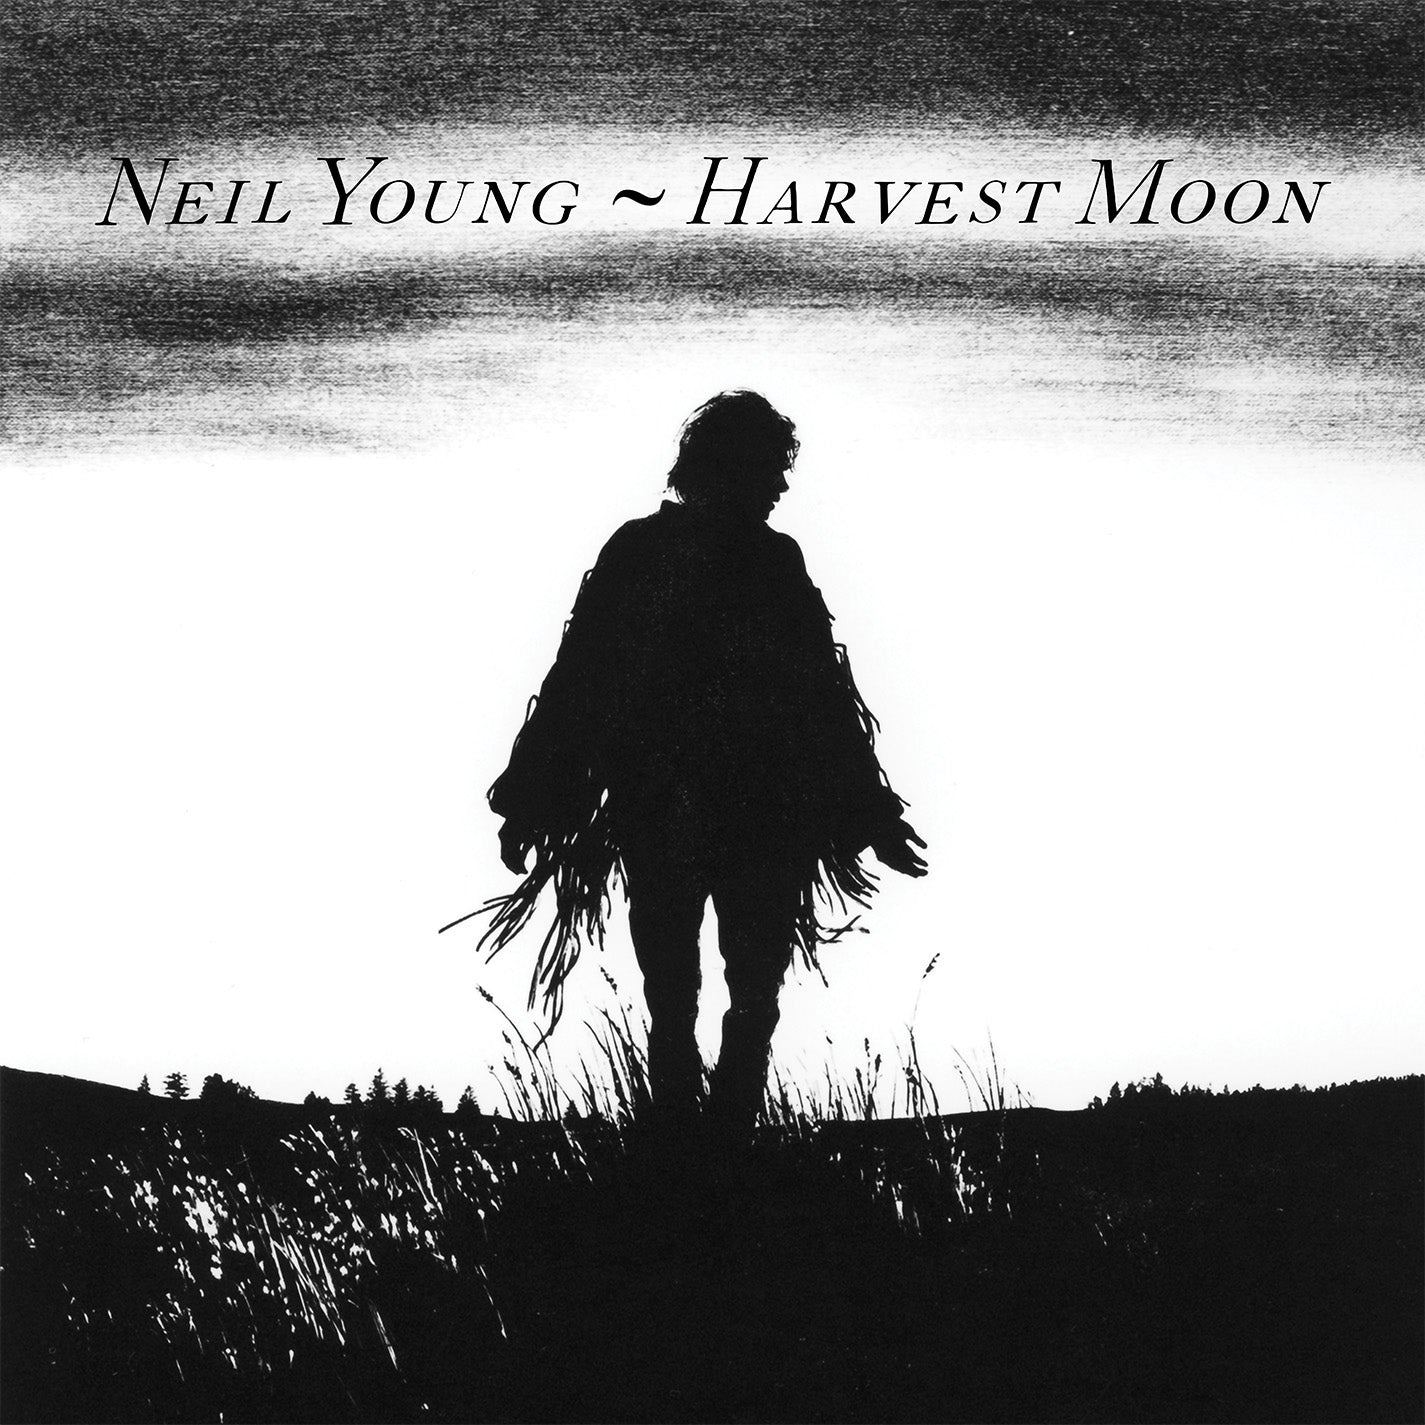 [DAMAGED] Neil Young - Harvest Moon